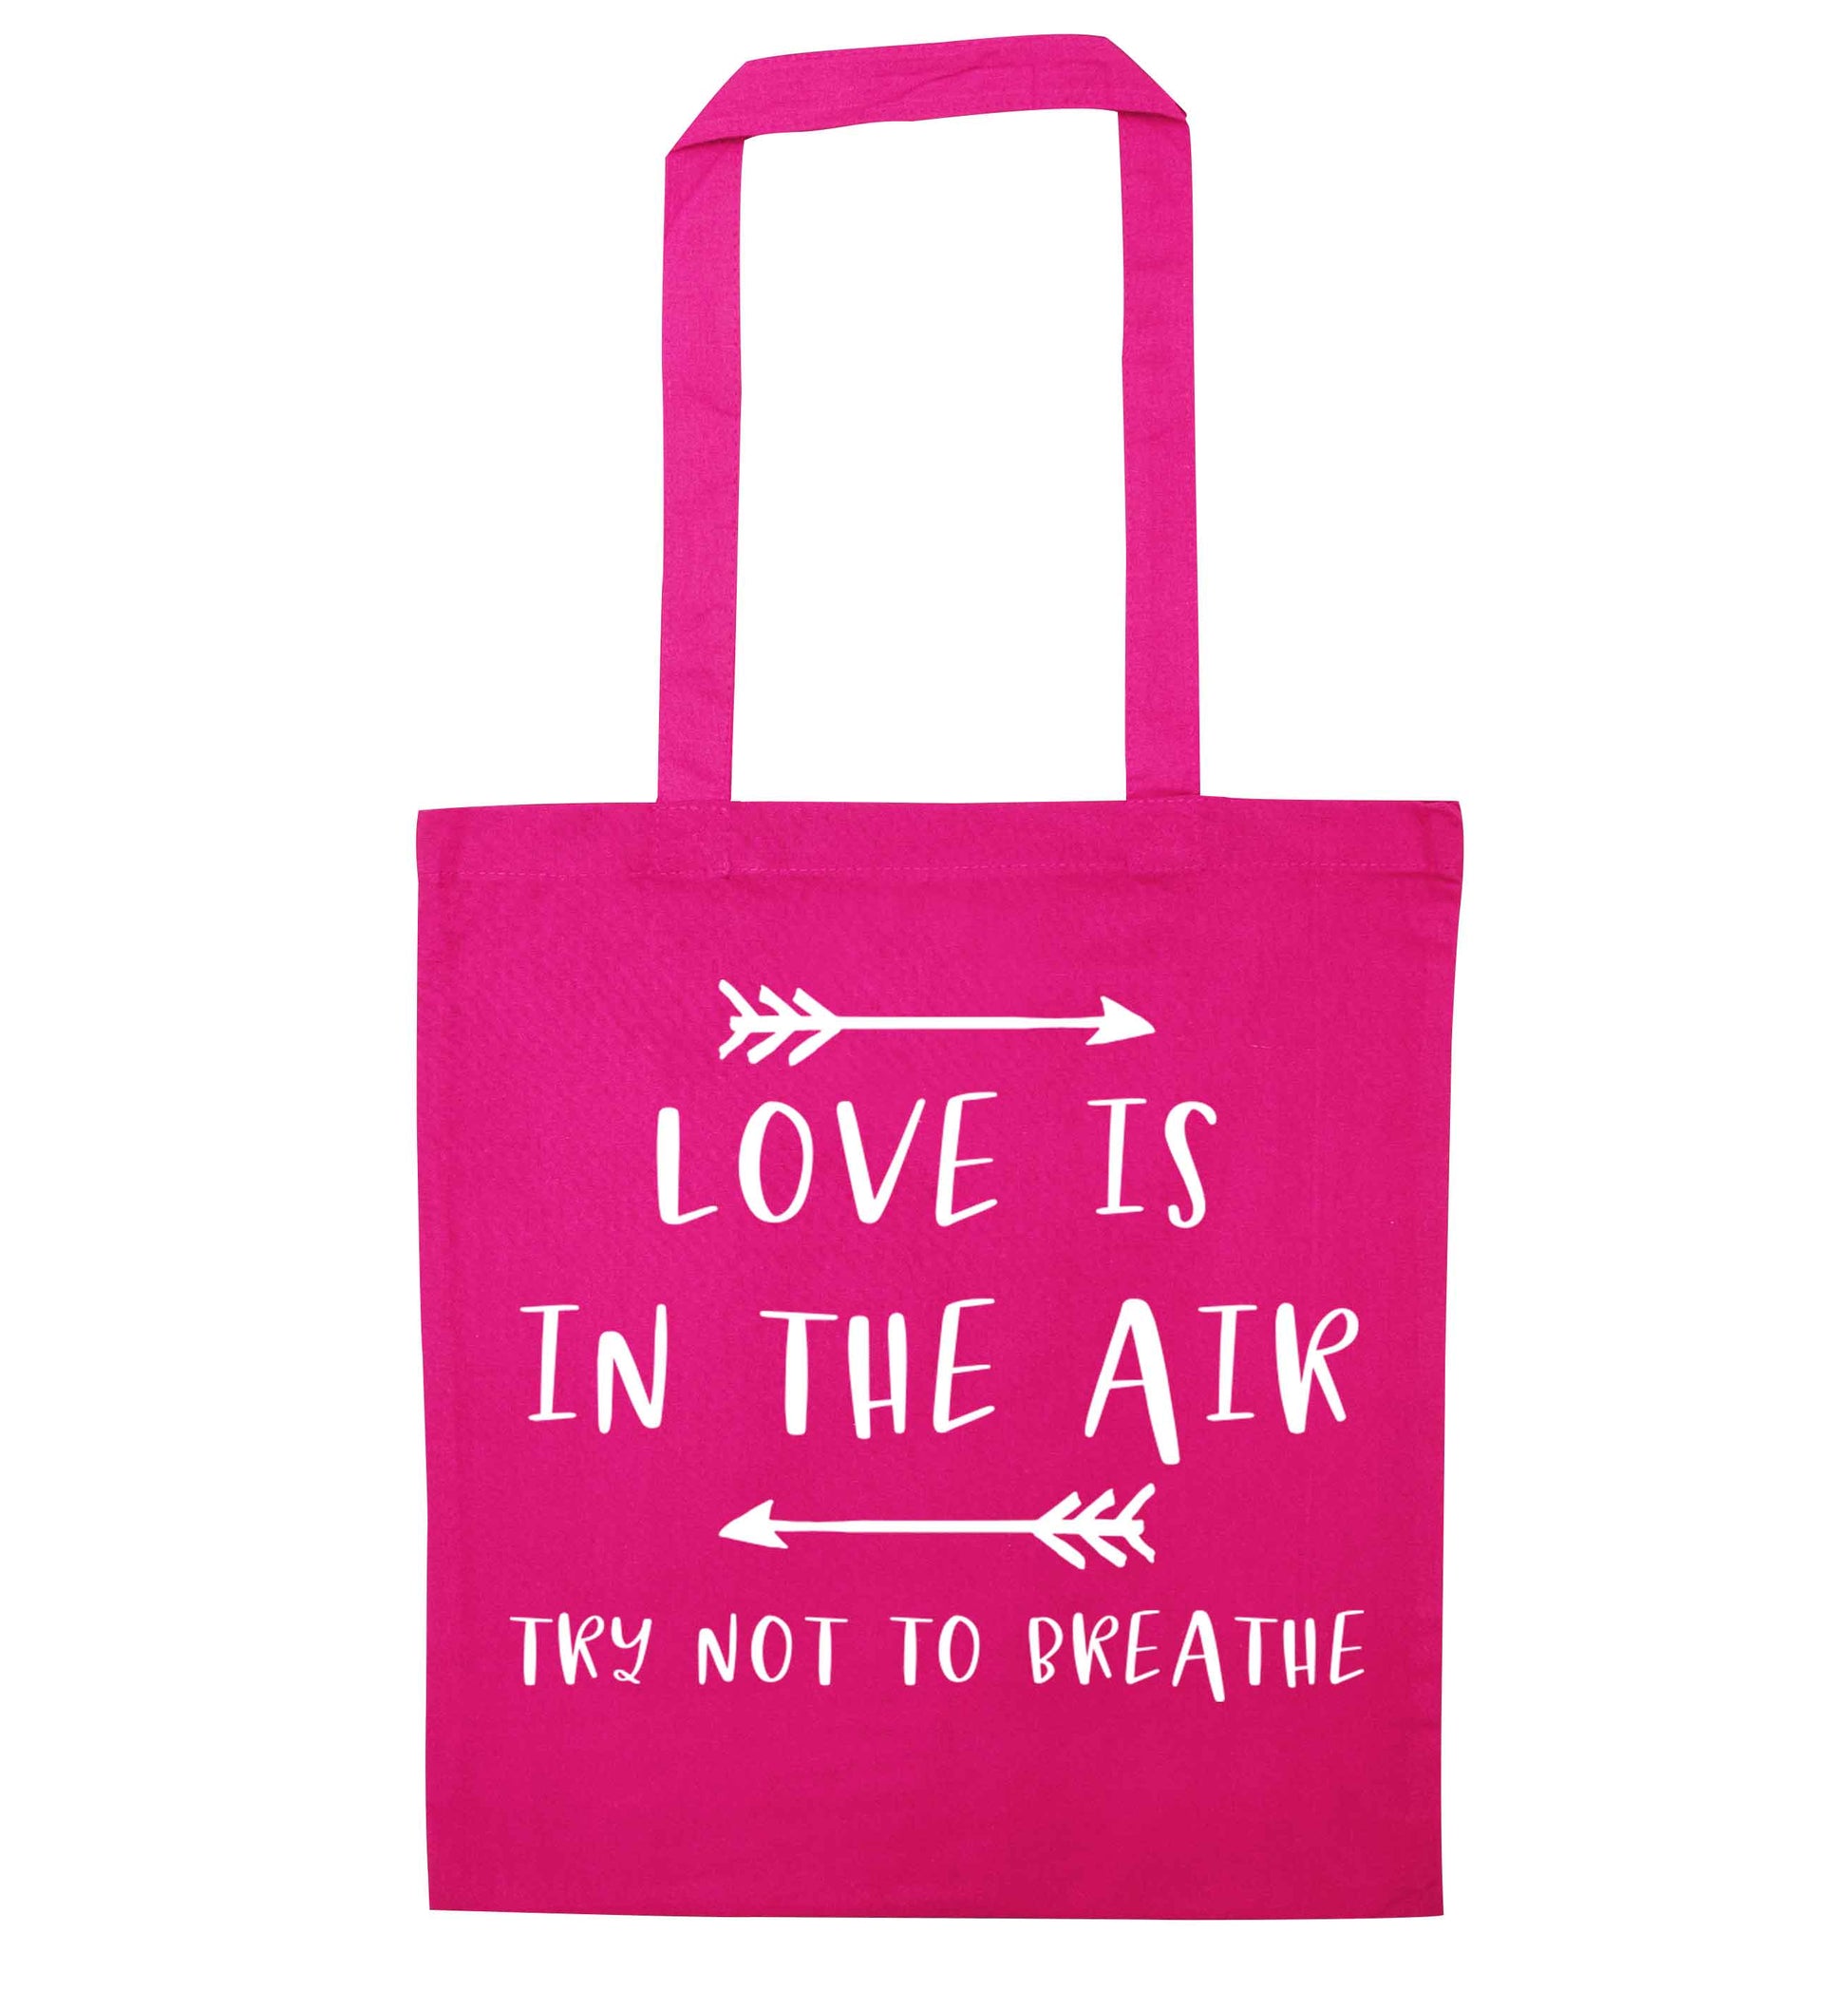 Love is in the air try not to breathe pink tote bag